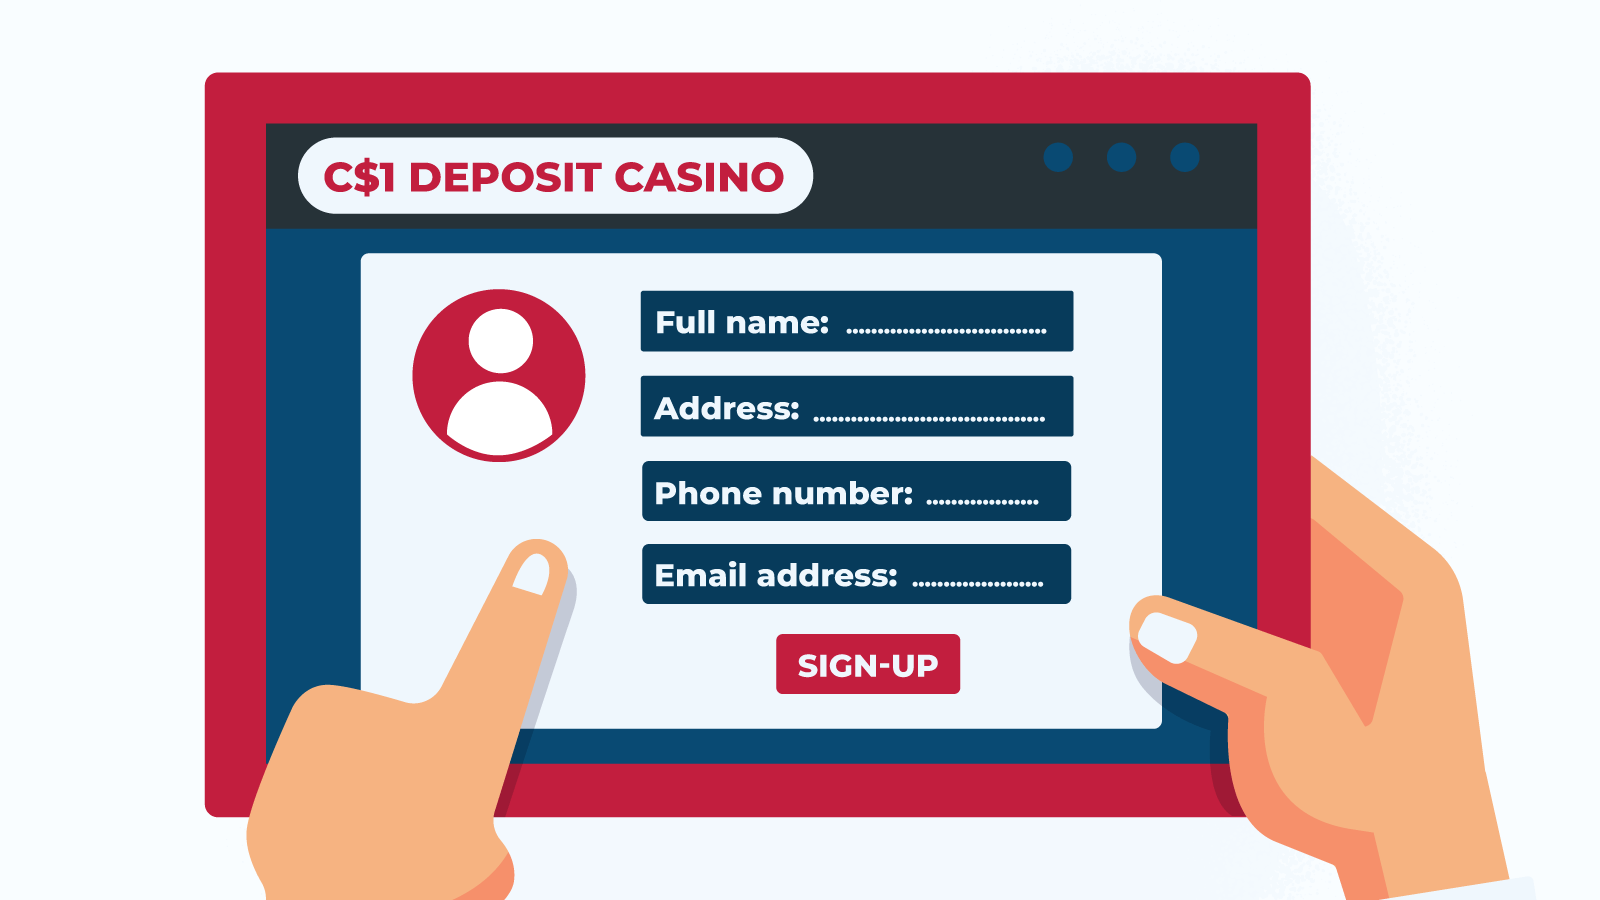 How can you join a C$1 deposit casino Canada